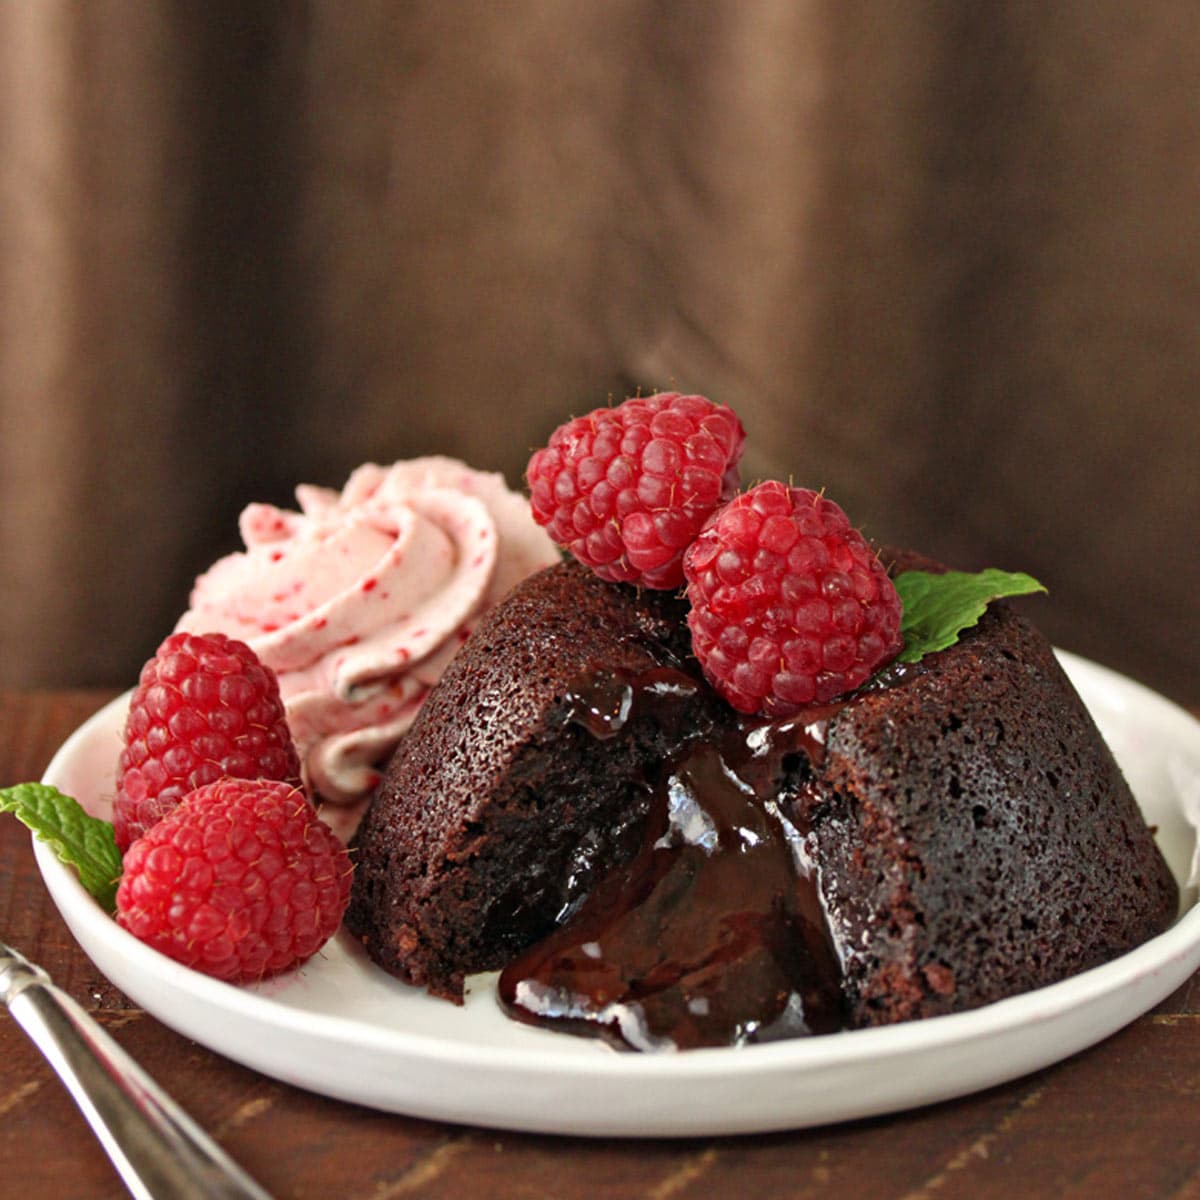 An easy lava cake made from ganache with fresh raspberries.